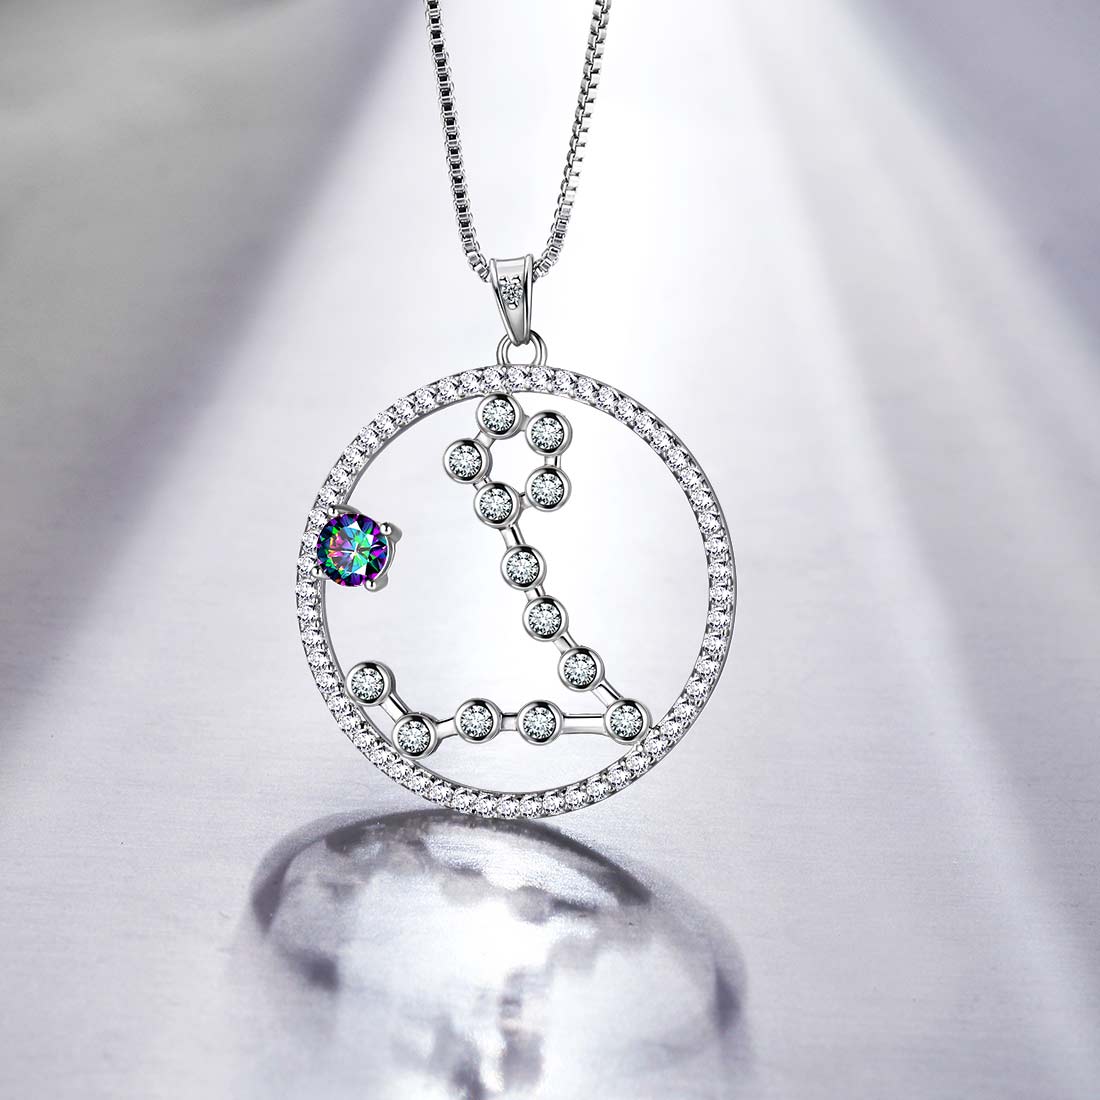 Pisces Zodiac Necklace 925 Sterling Silver - Necklaces - Aurora Tears Jewelry